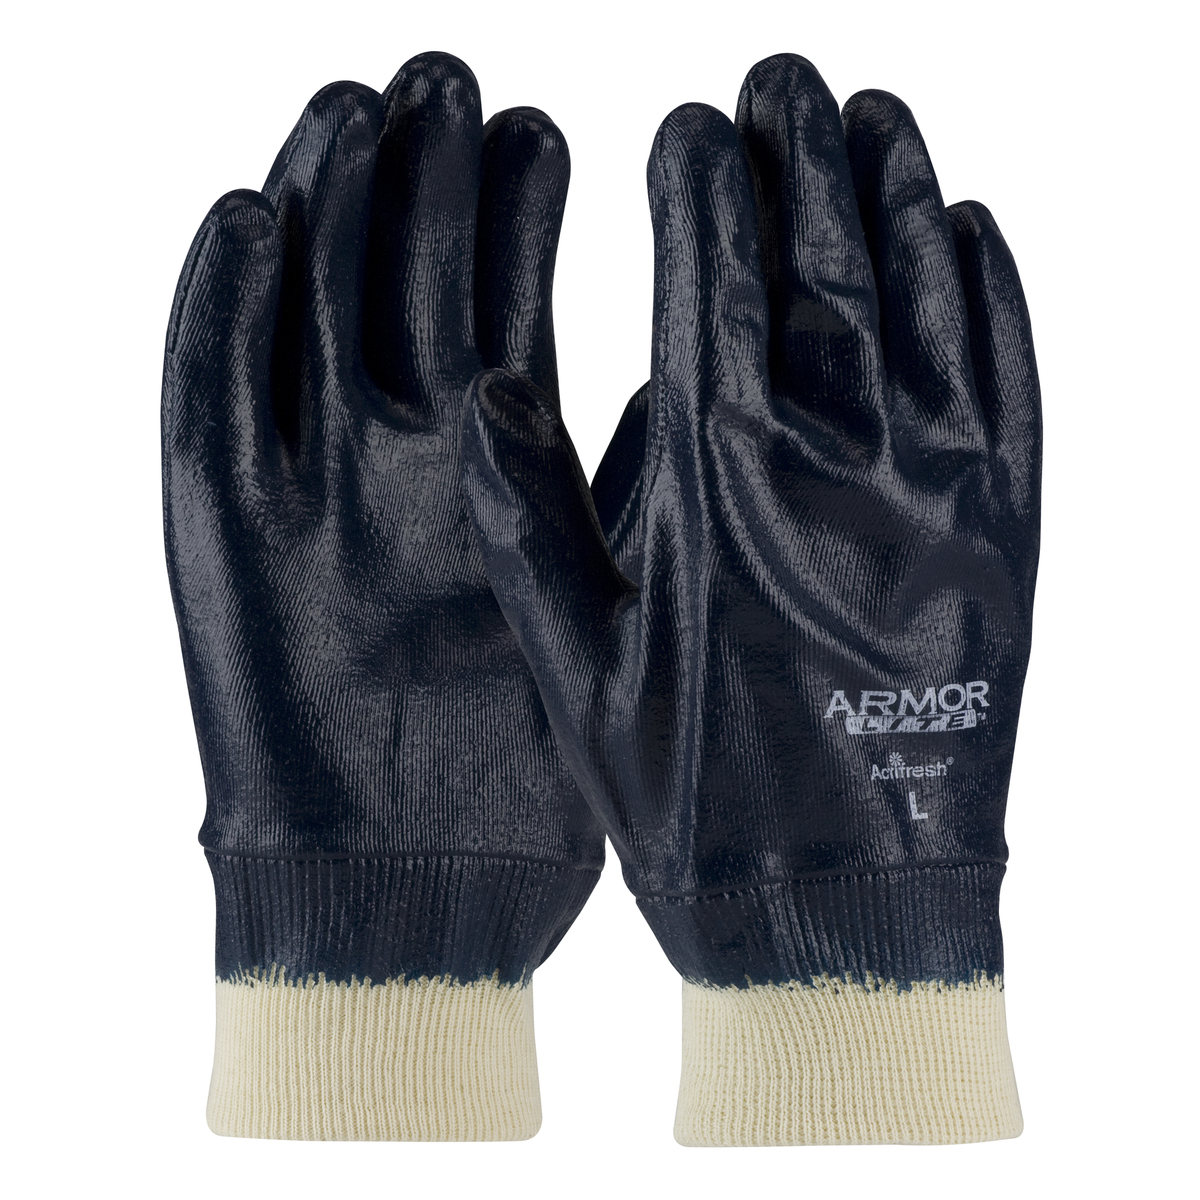 PIP® Medium ArmorLite® XT Light Weight Blue Nitrile Full Coated Work Gloves With Cotton Liner And Continuous Knit Wrist